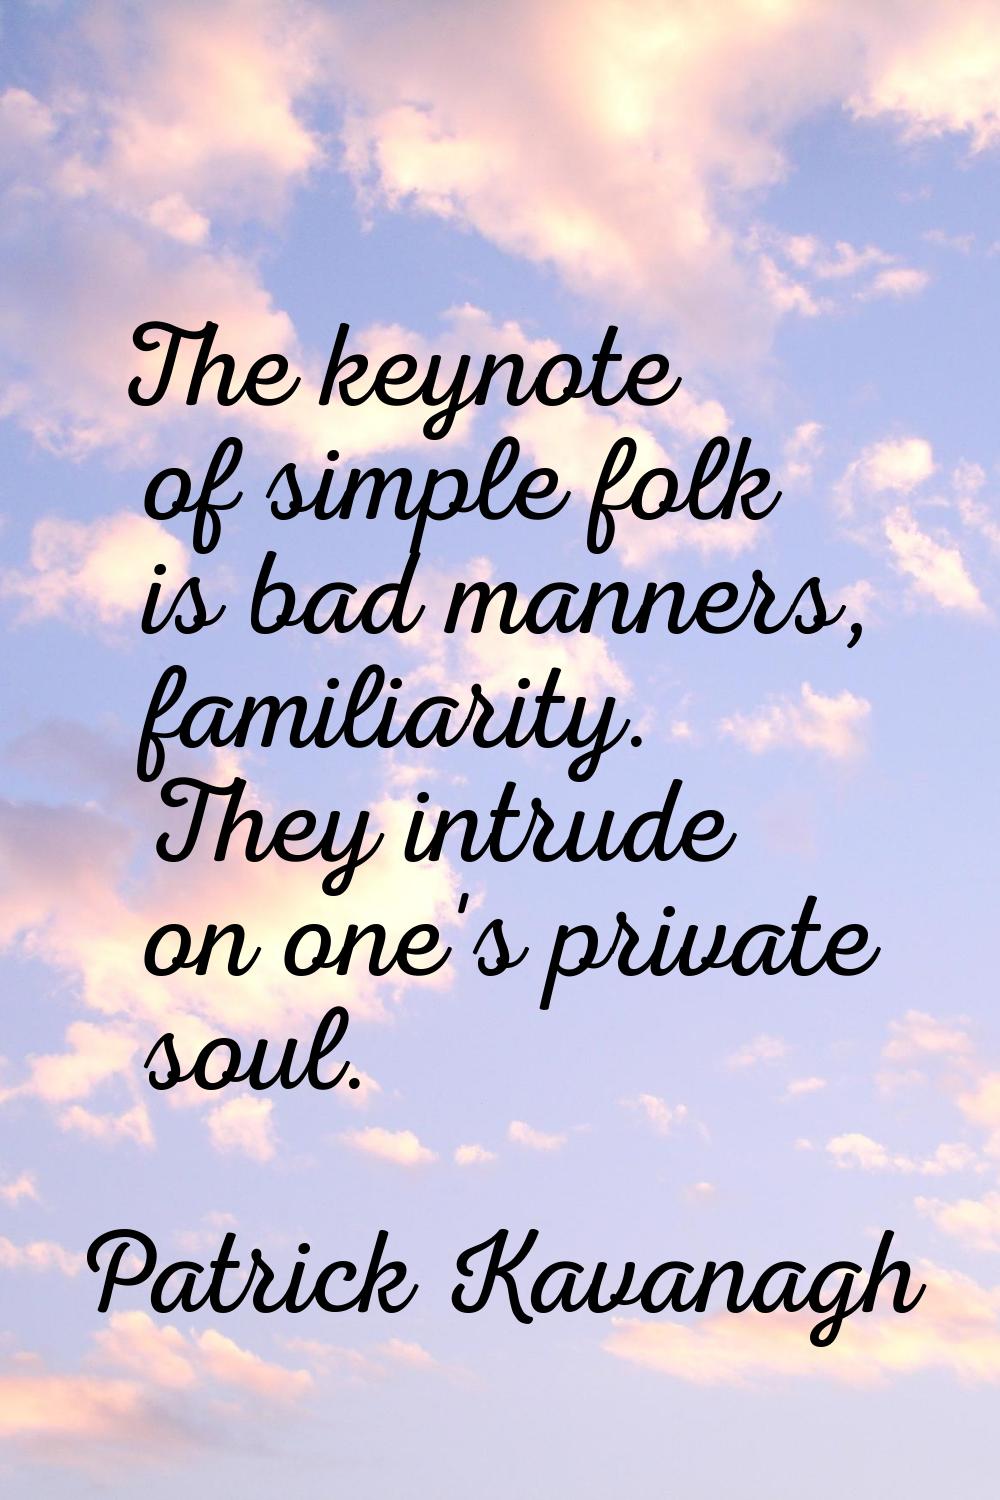 The keynote of simple folk is bad manners, familiarity. They intrude on one's private soul.